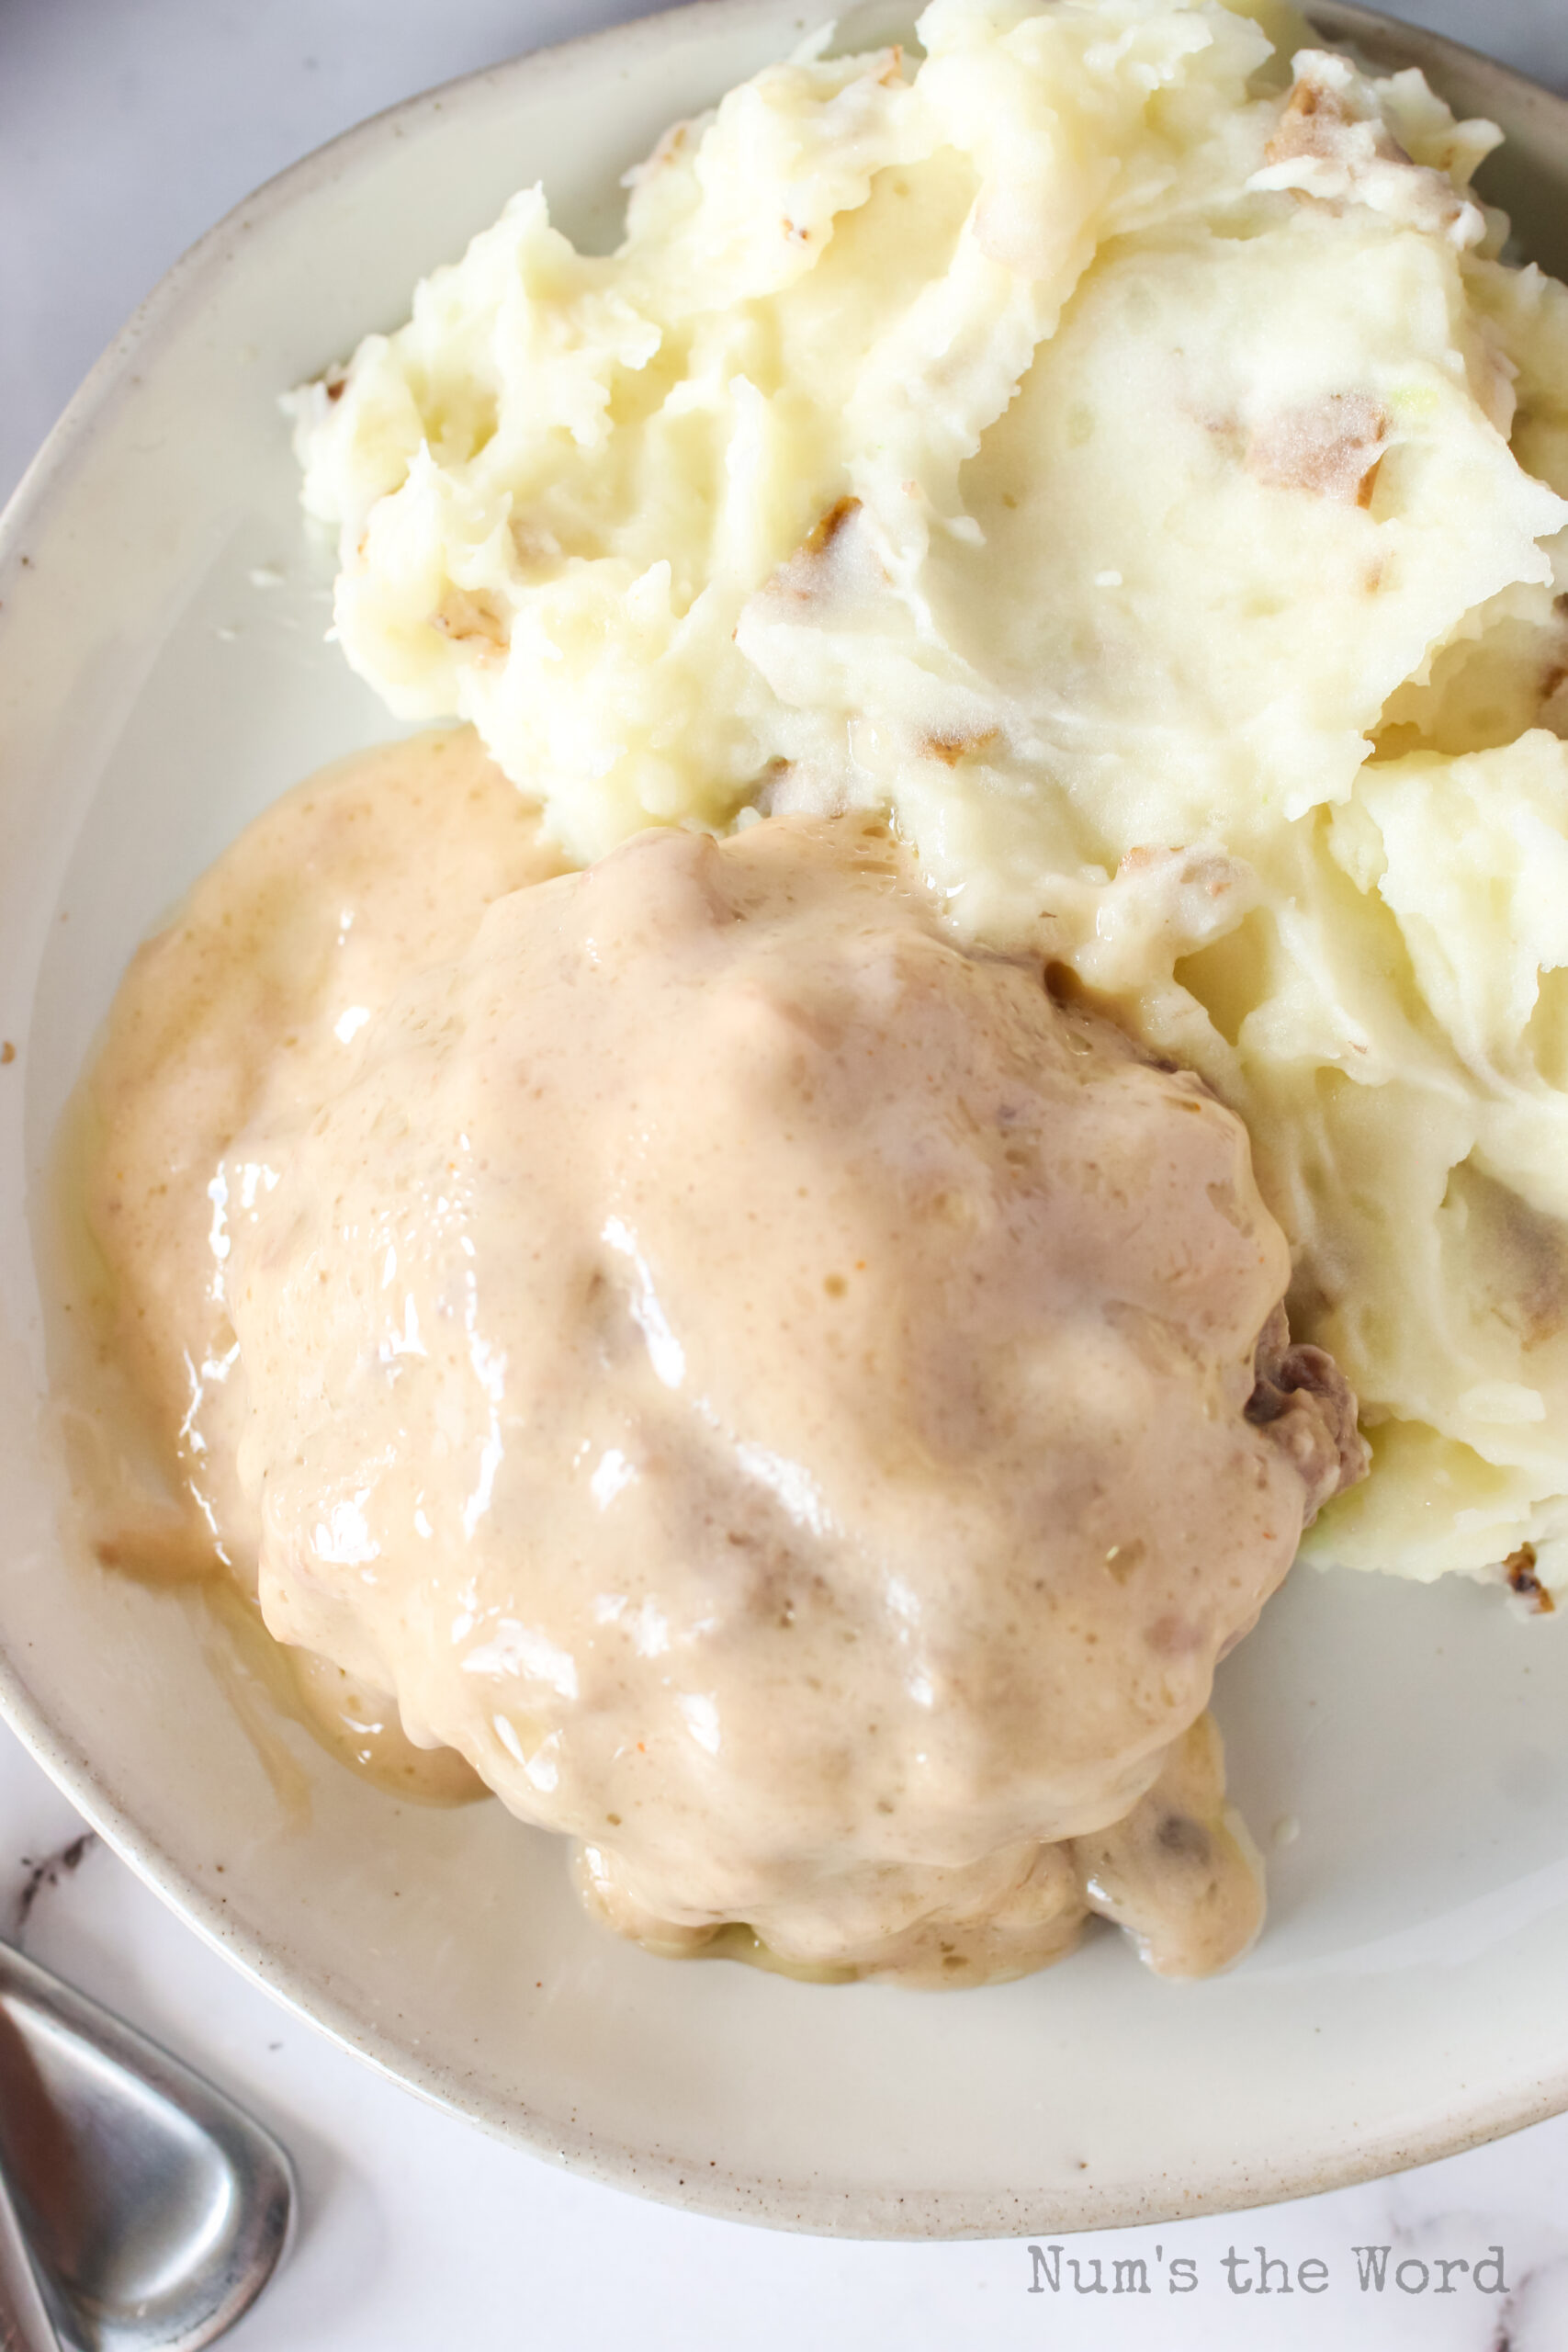 top view of burger with mashed potatoes on a plate, smothered in gravy,.